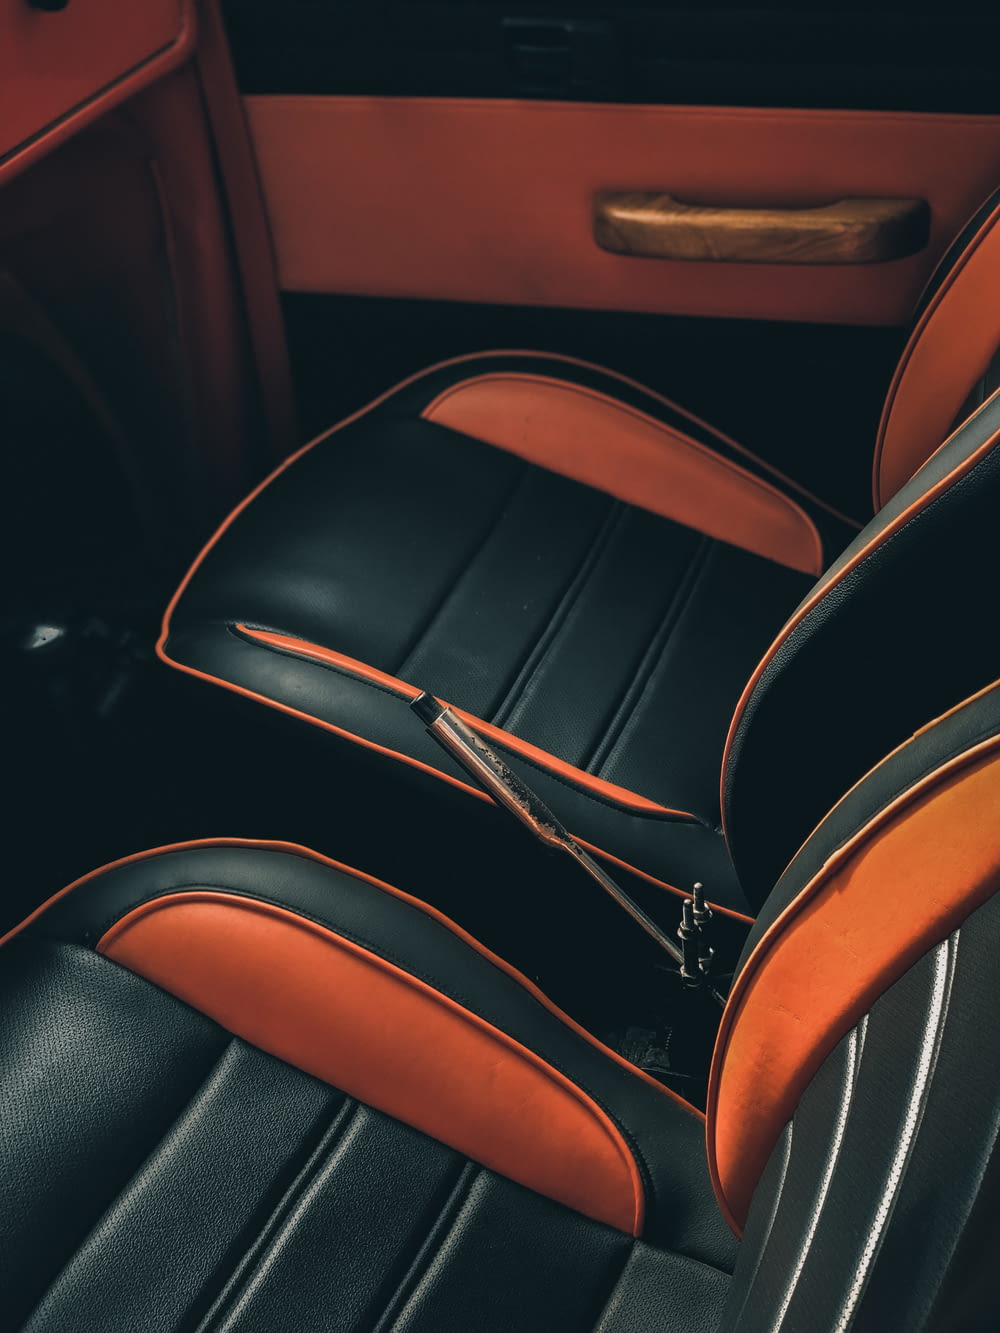 the interior of a car with black and orange seats